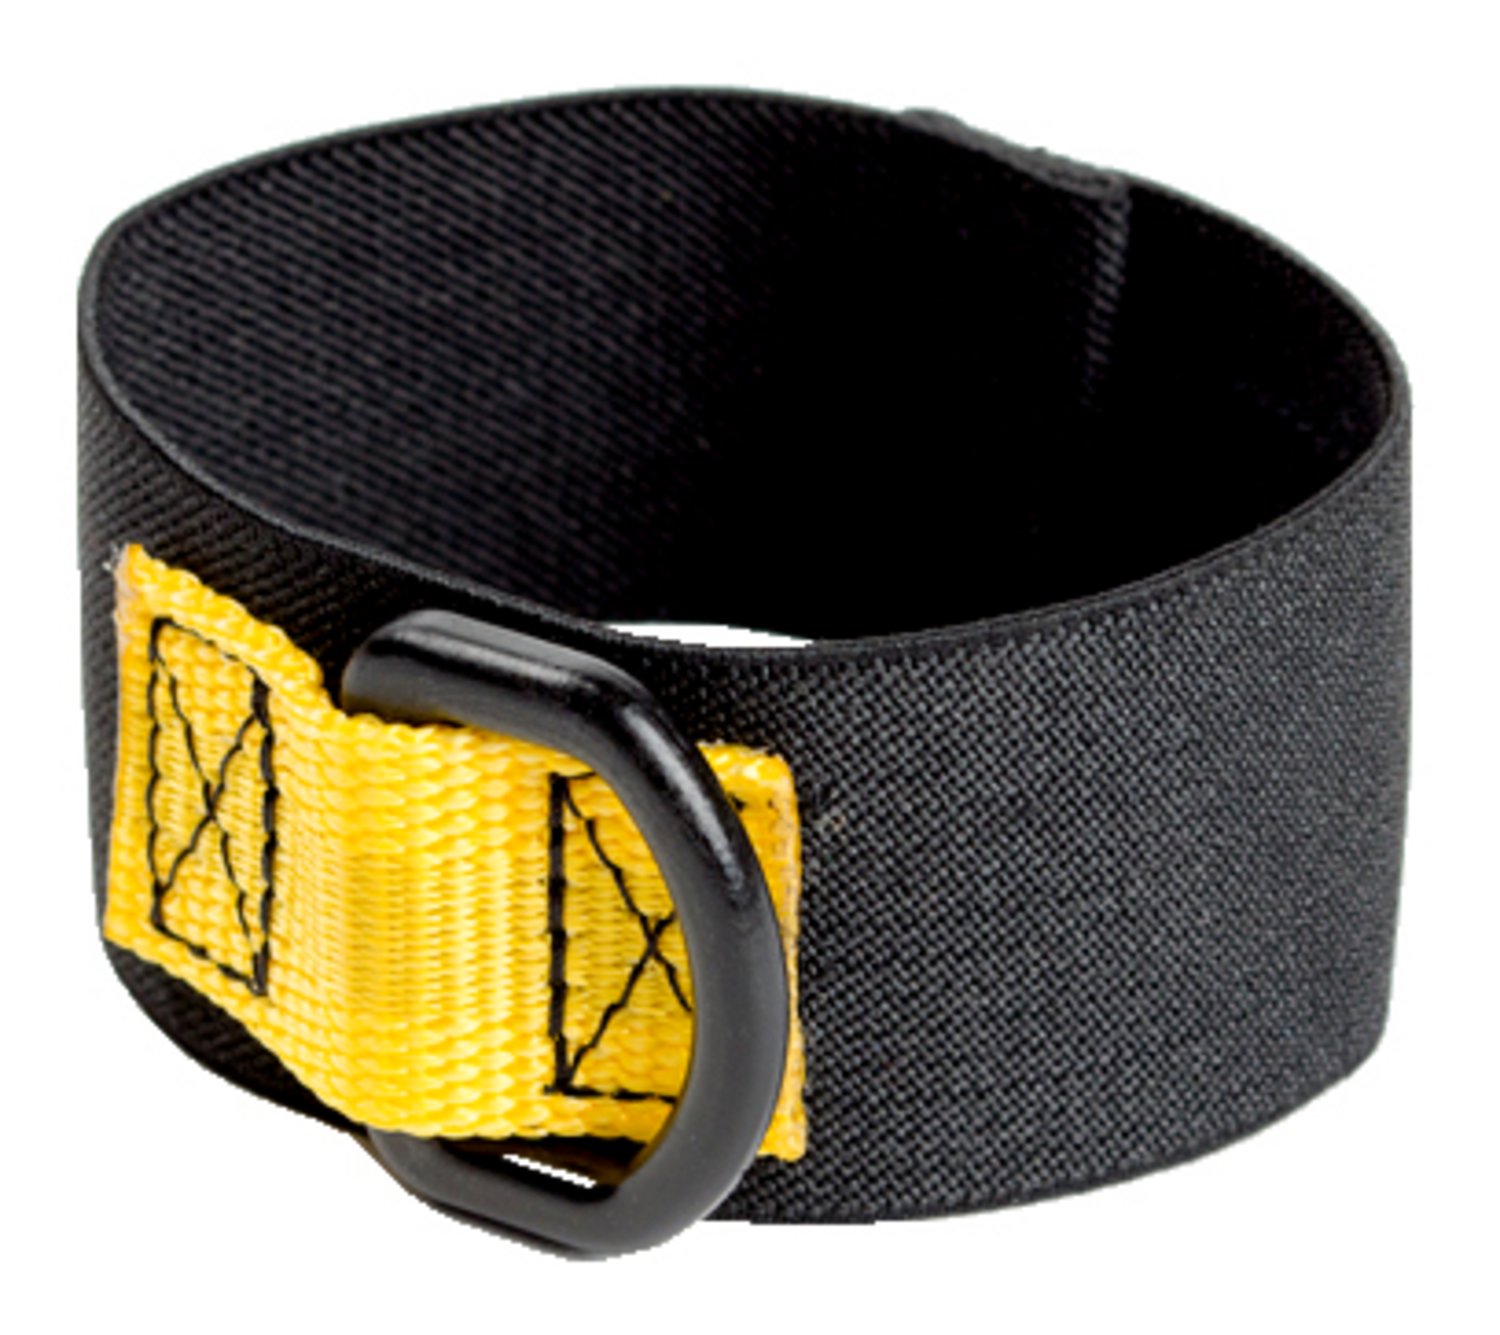 7012818118 - 3M Pull-Away Elastic Wristband with D-ring 1500080, 5 lb Capacity, Large/Slim